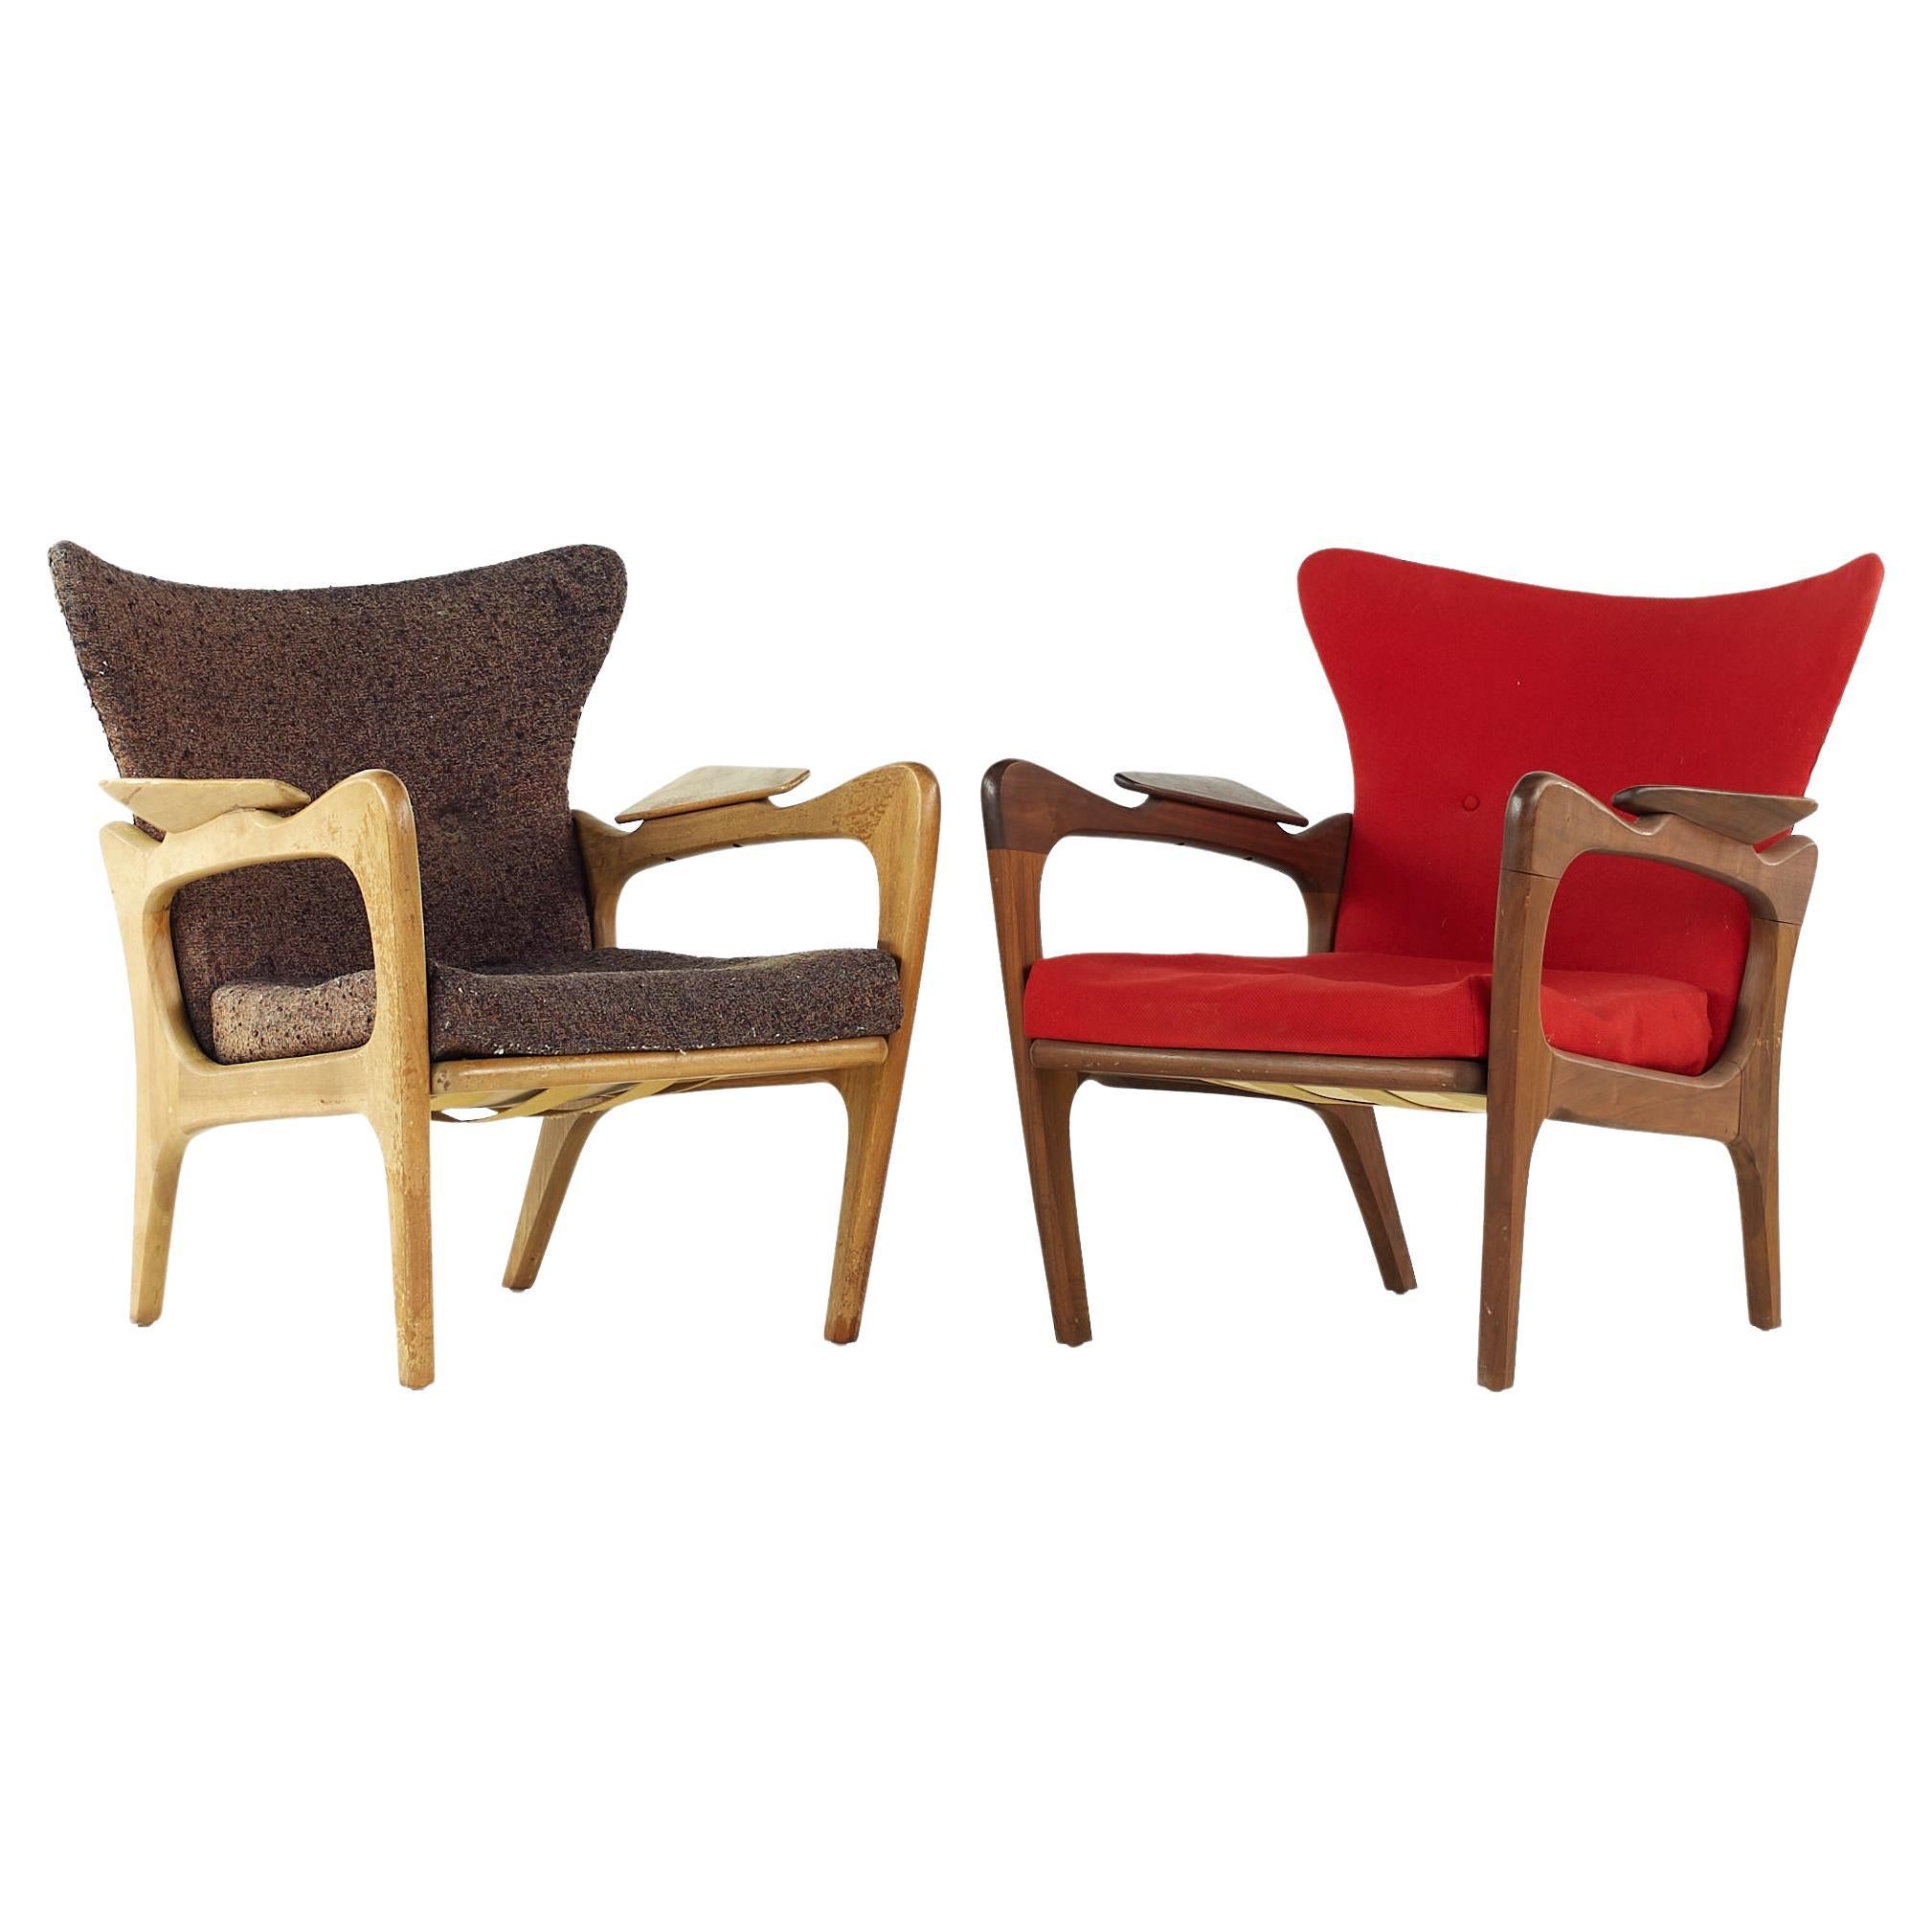 Adrian Pearsall for Craft Associates Mid Century Lounge Chair - Pair For Sale